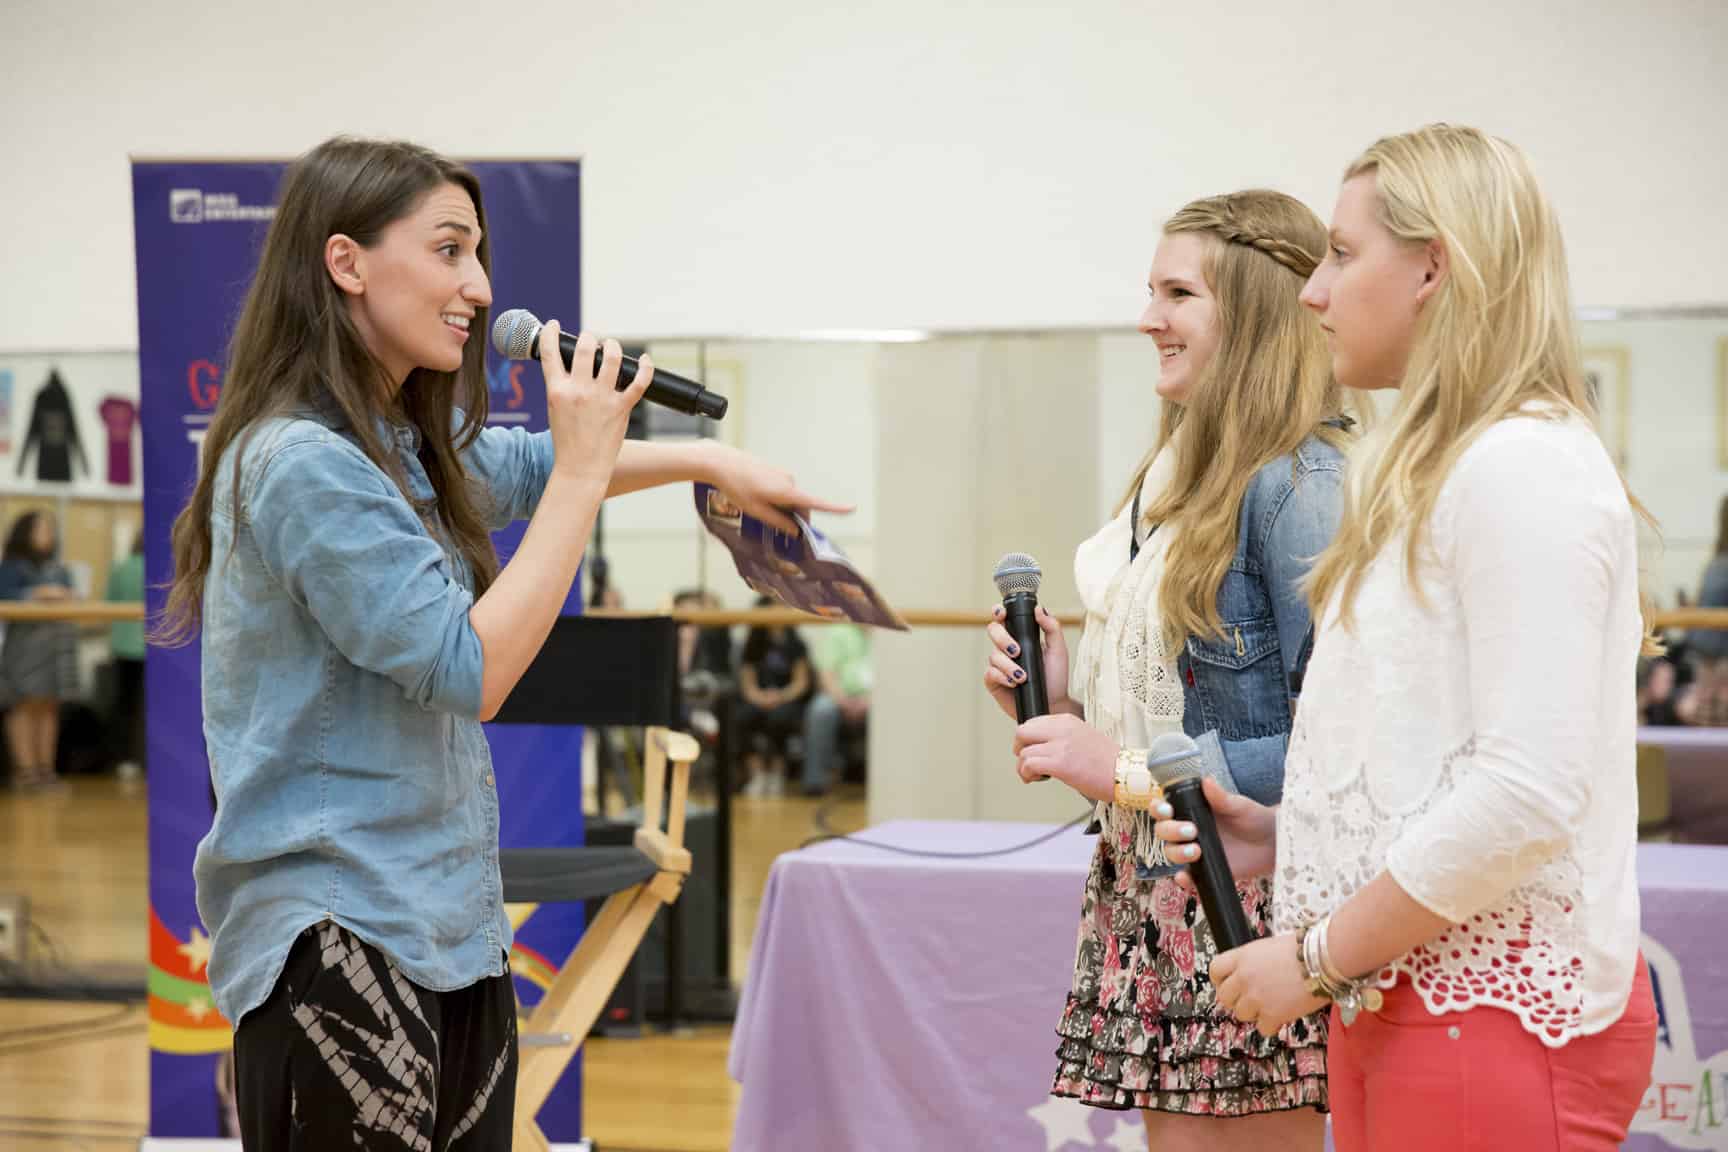 Musician Sara Bareilles mentors Gabrielle (center) in preparation for the Garden of Dreams Talent Show at Radio City Music Hall.